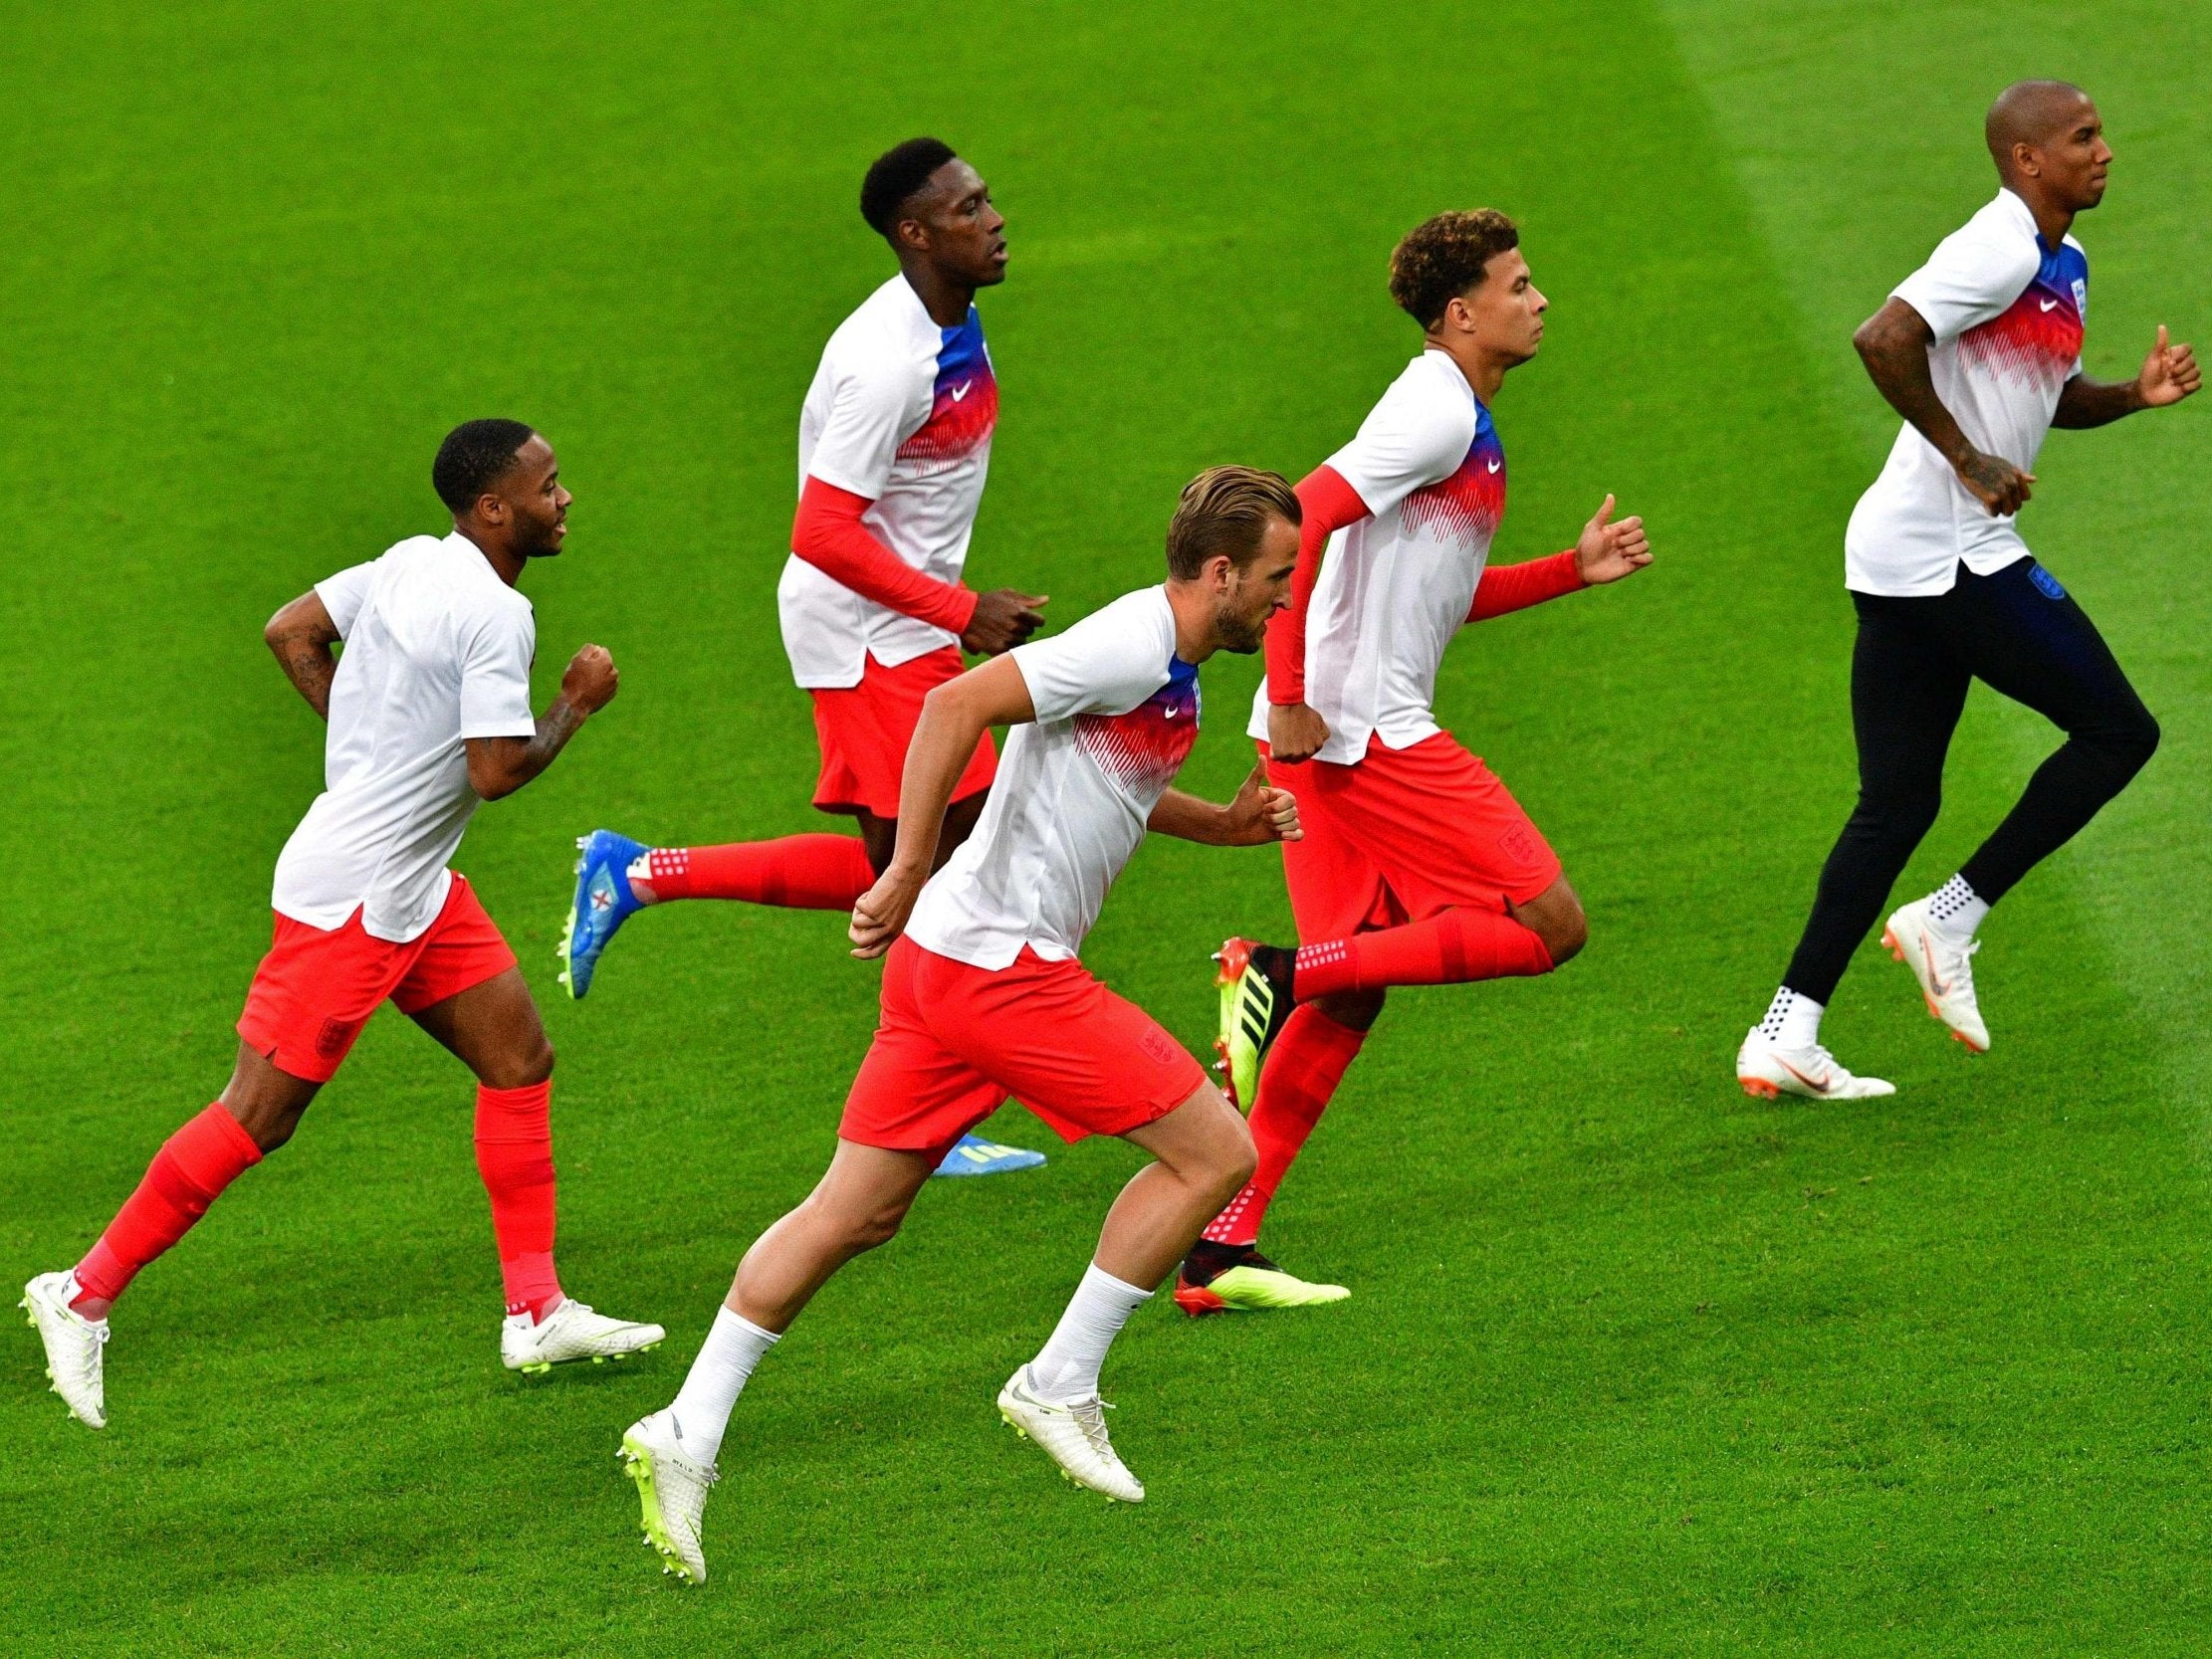 England vs Colombia LIVE World Cup 2018: James Rodriguez out - prediction, how to watch online, what time, what TV channel, line-ups, team news